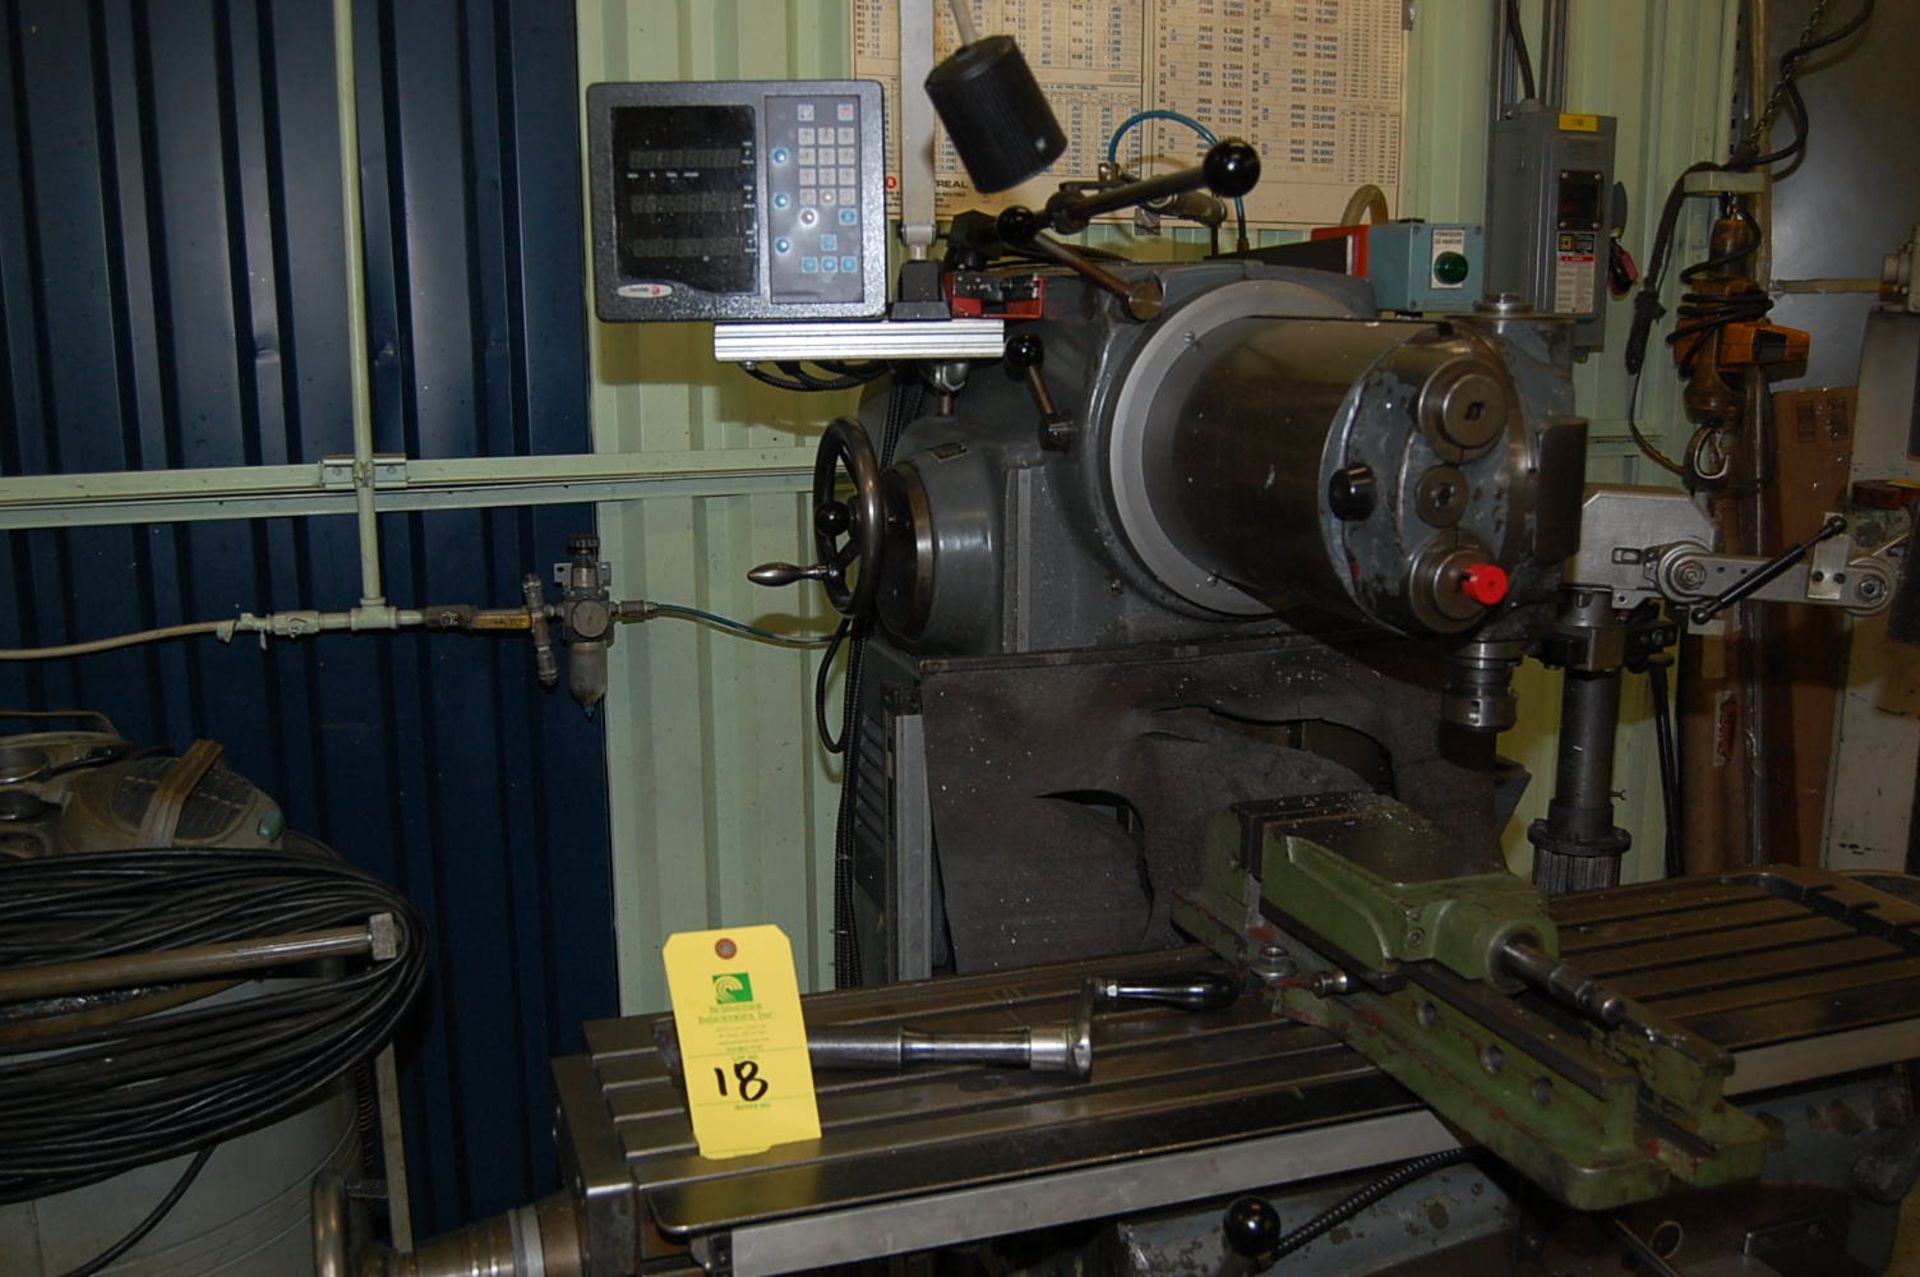 Schaublin Type 53/Serial #168023 Universal Milling Machine, (18) Spindle Speeds, 38-1510 RPM, 44 in. - Image 2 of 3